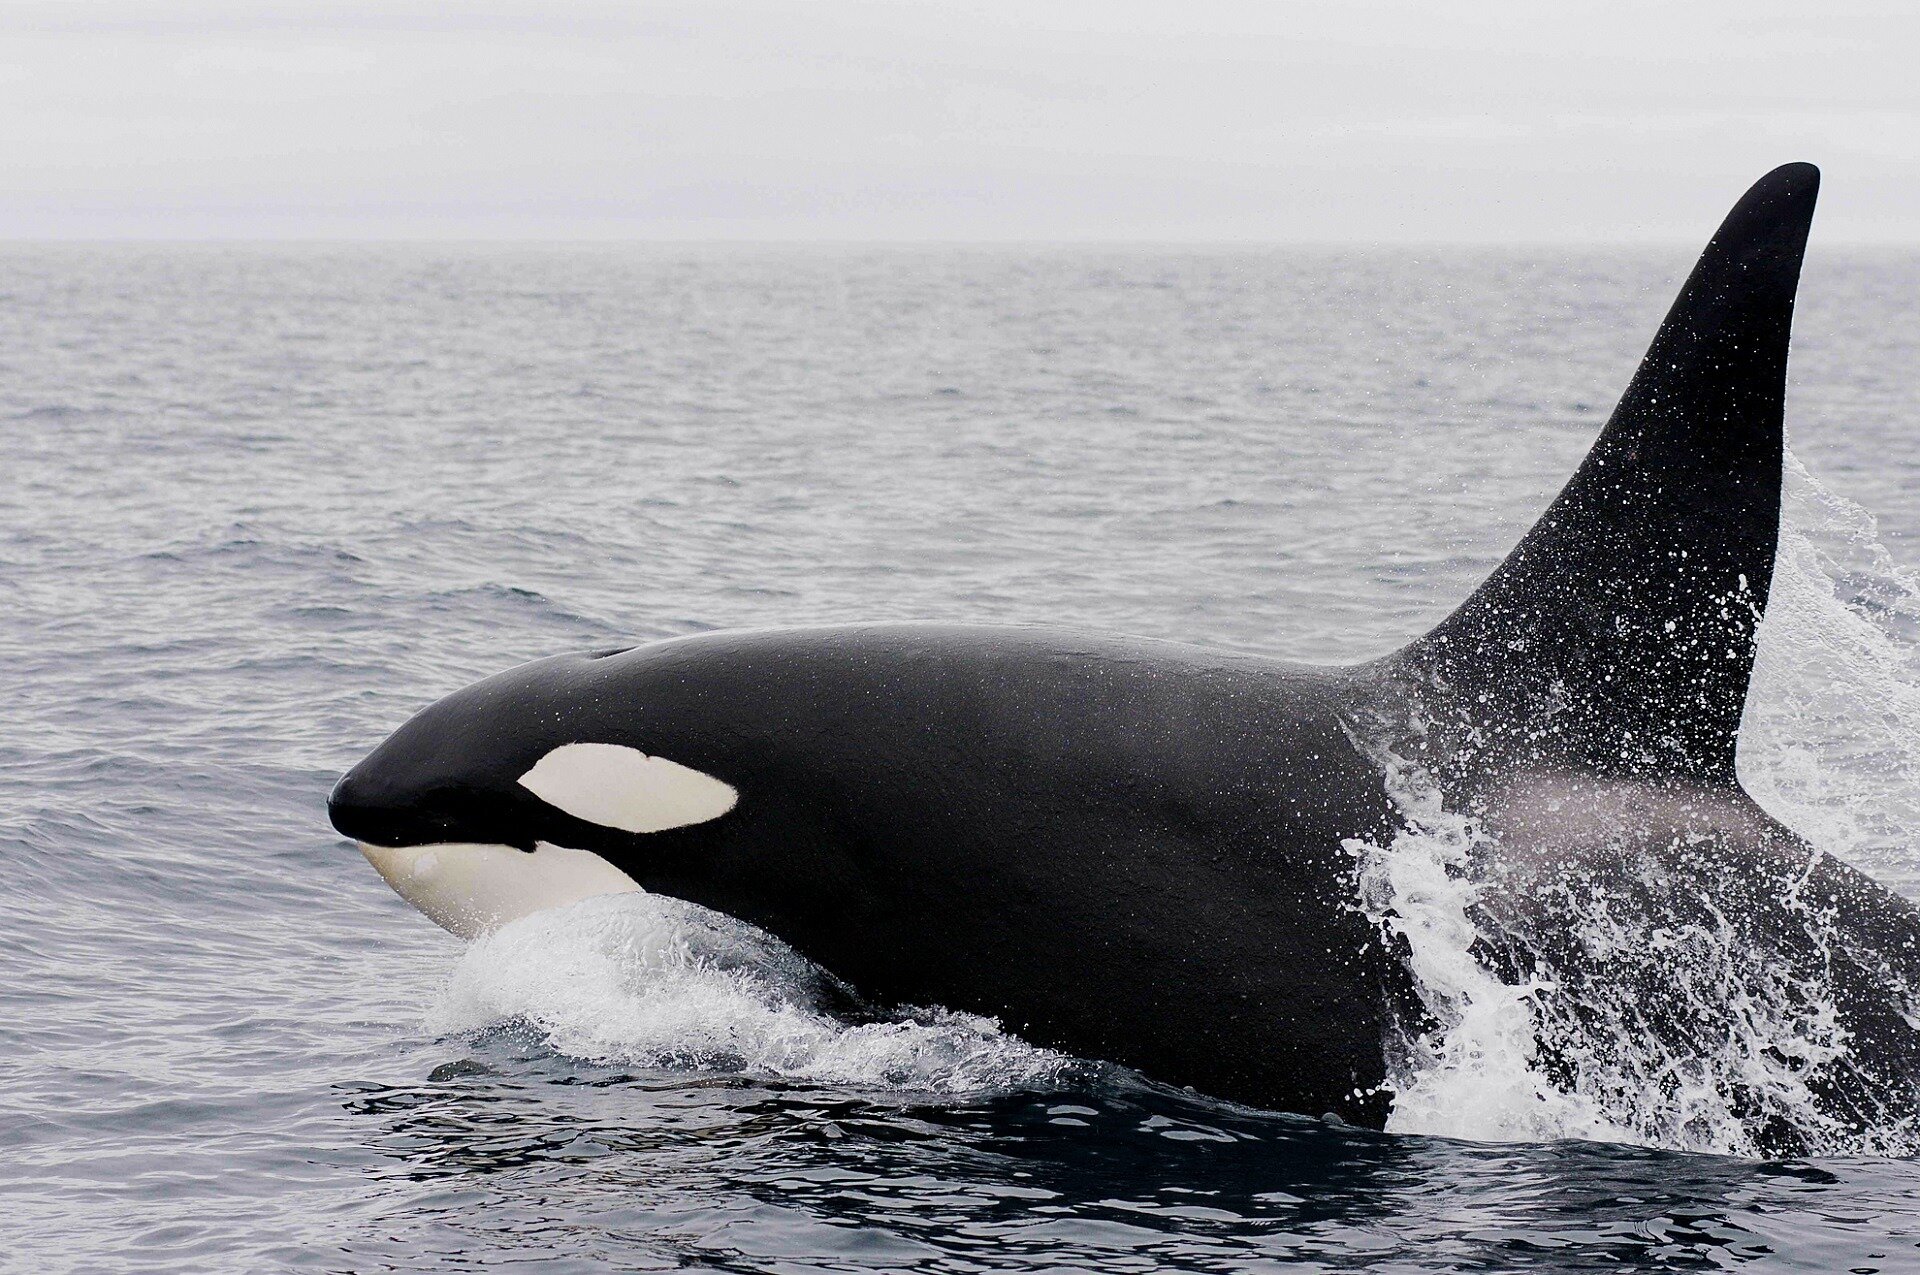 Female resident orcas especially disturbed by vessels, new research shows - Phys.org